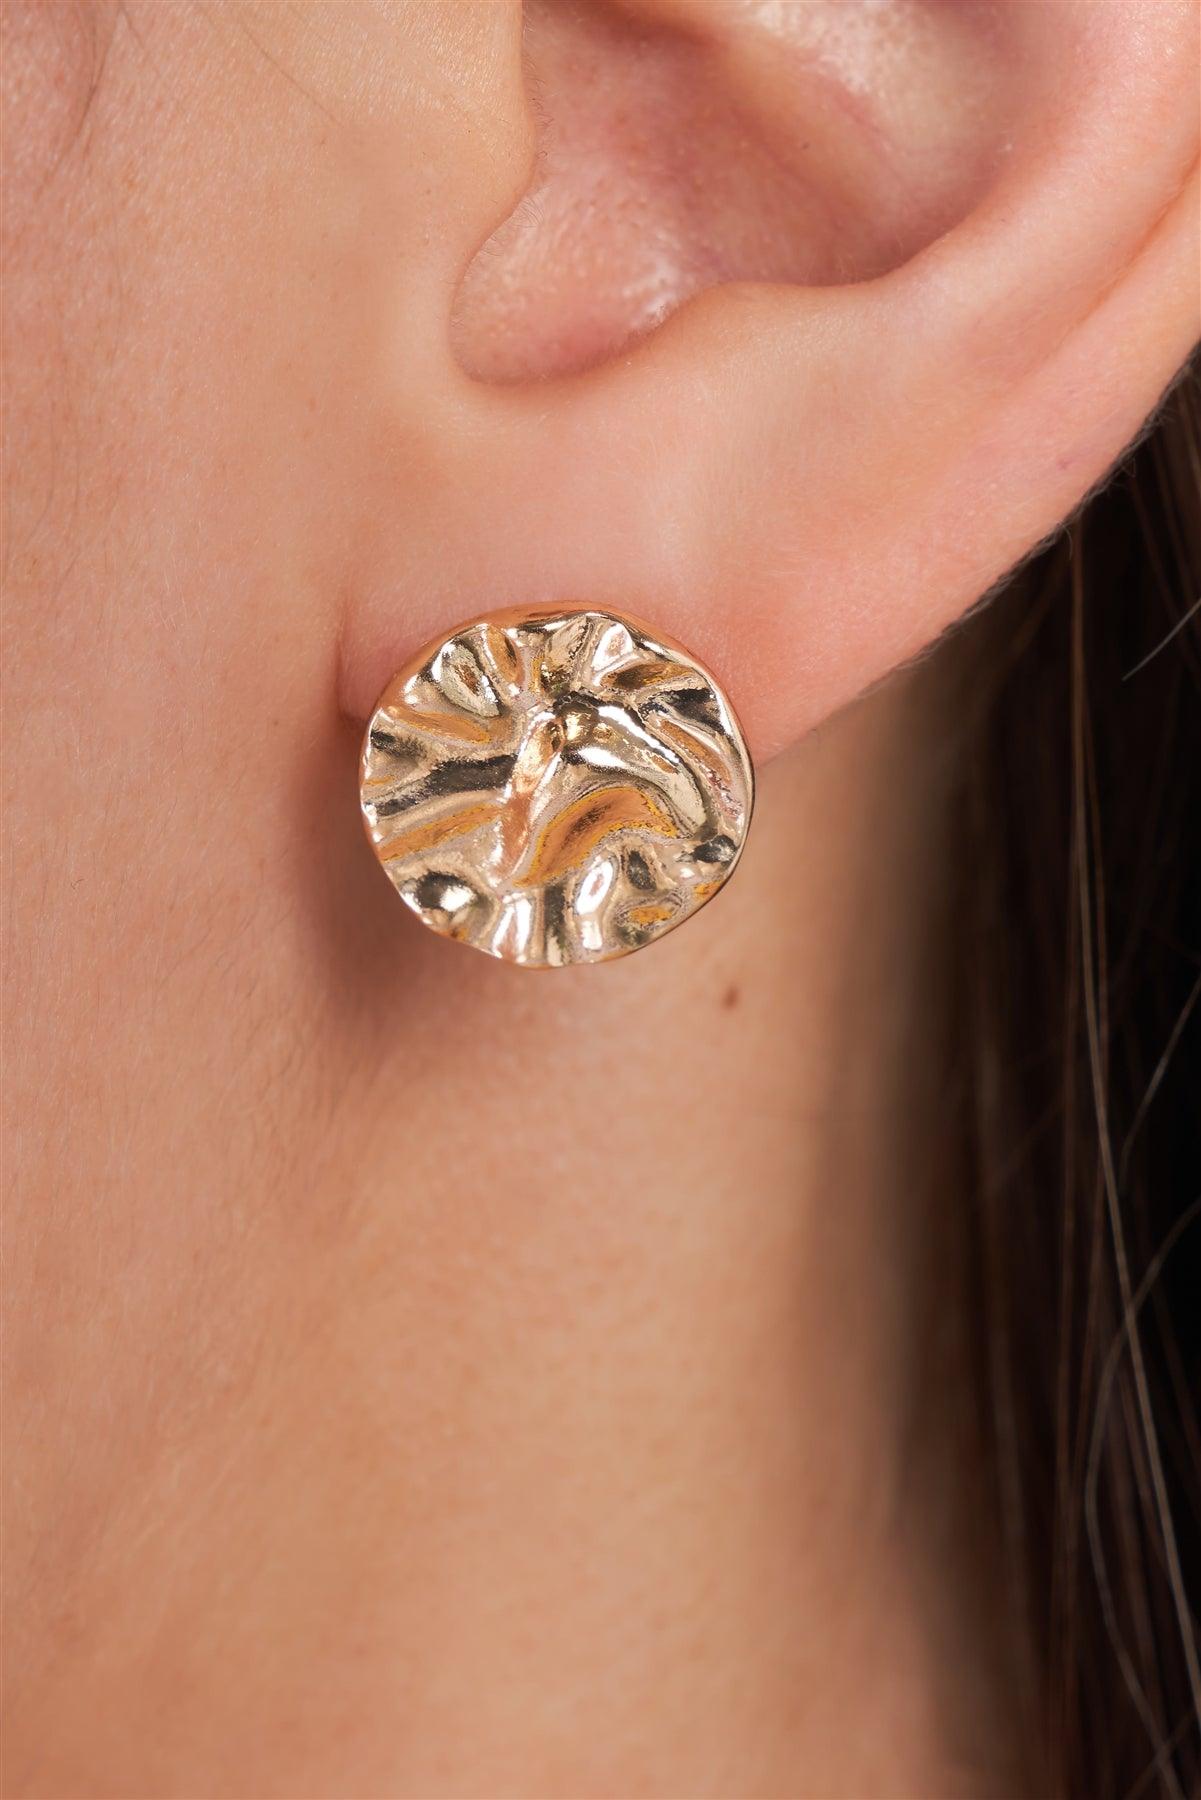 Gold Crushed Circle Stud Earrings / 3 Pairs